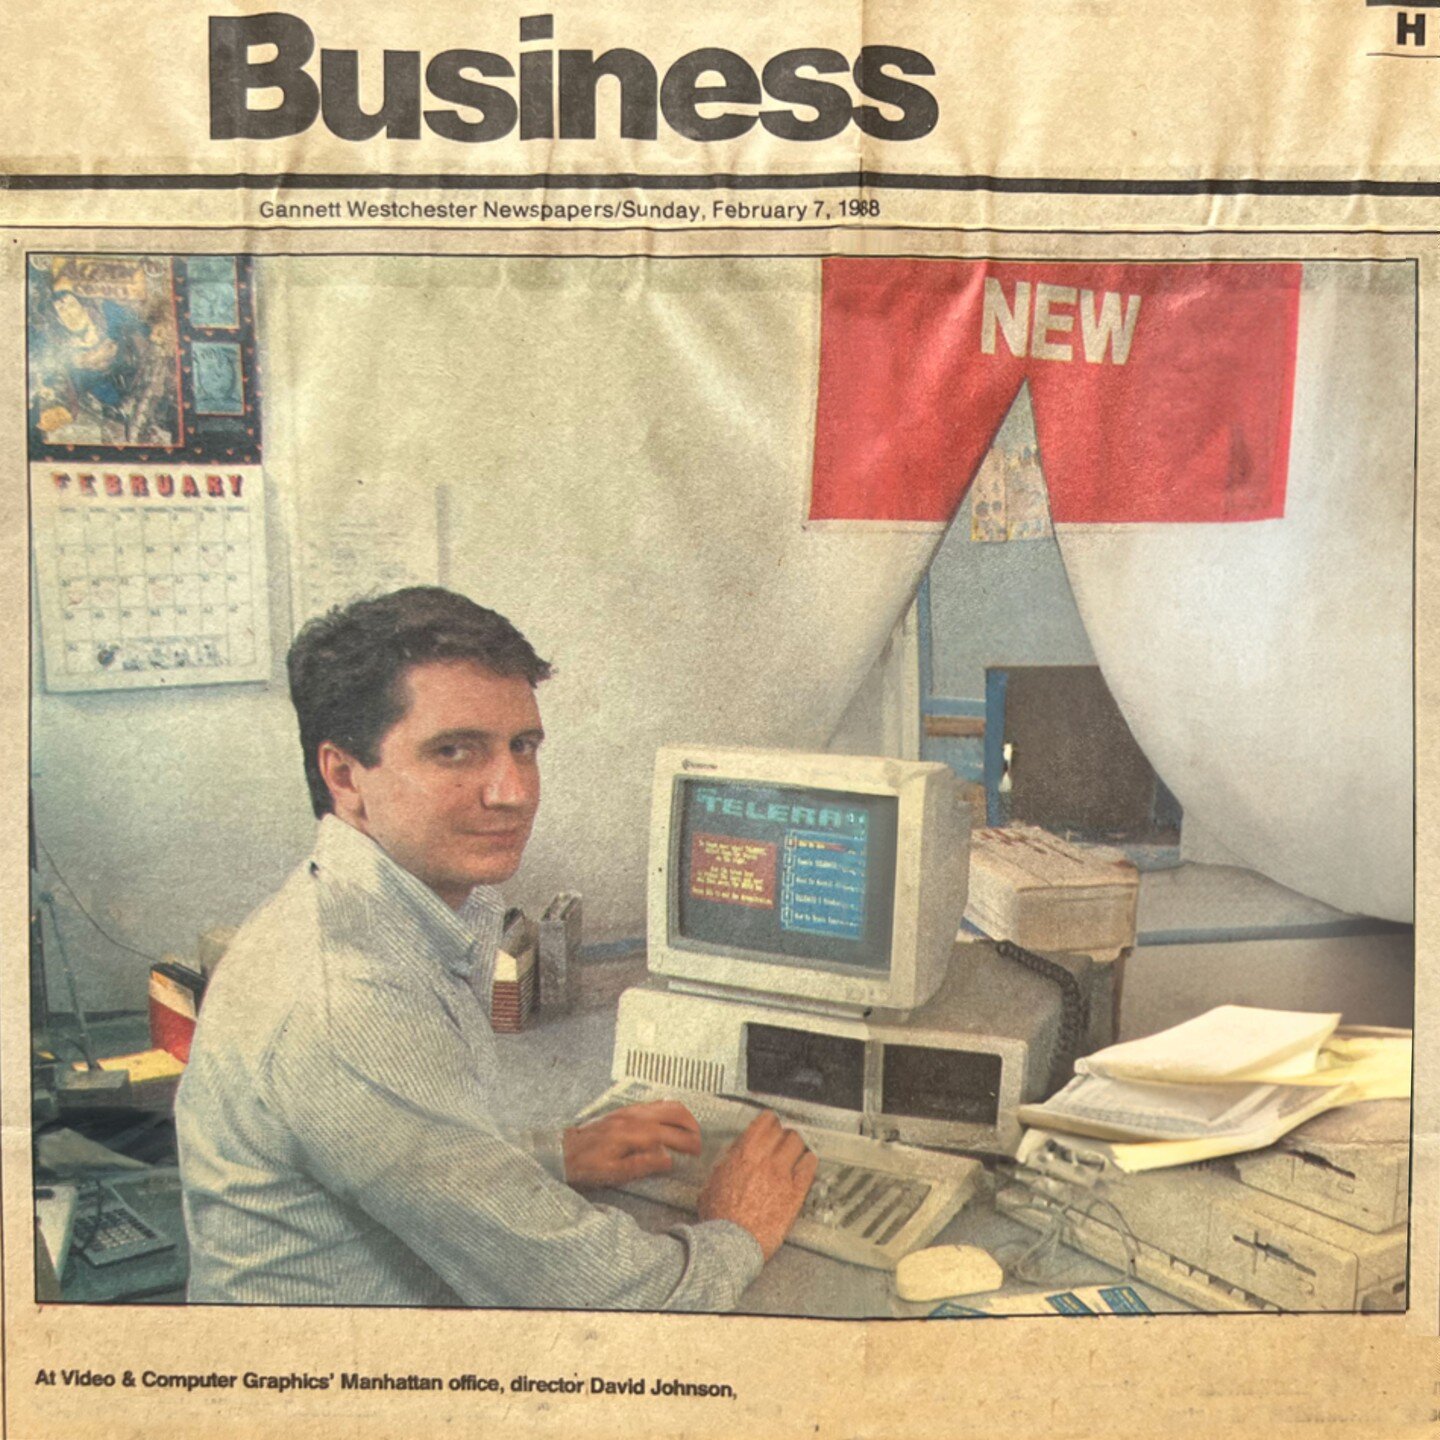 1988 studio on W 27th Street. Working on a project for Telerate - an early online financial service that was eventually destroyed by Bloomberg.

#throwbackthursday #tbt❤️ 
#vintagecomputer #retro #retrocomputing #retrogamer #80s #vintage #ibm #comput